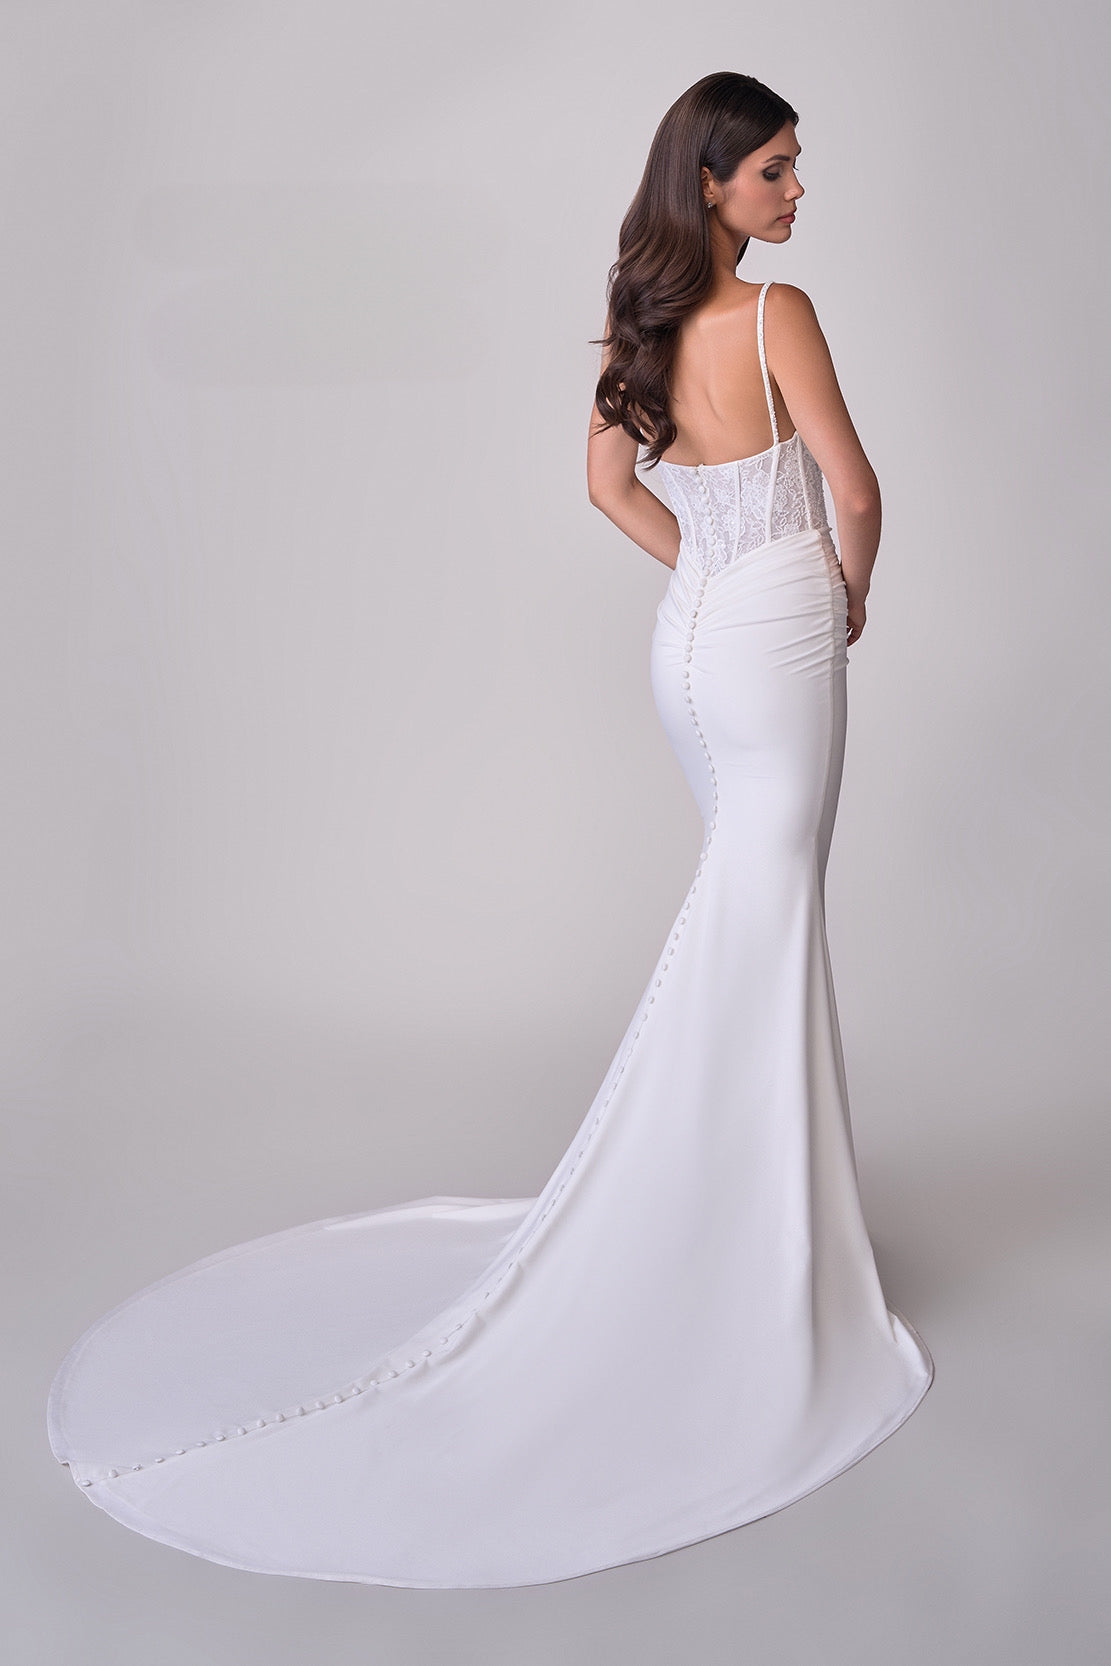 Joelle Olivia by La Femme J2172 Mabel Bridal Gown - Luxe jersey wedding dress with lace corset top and a sweeping train. Ideal for bridal occasions.